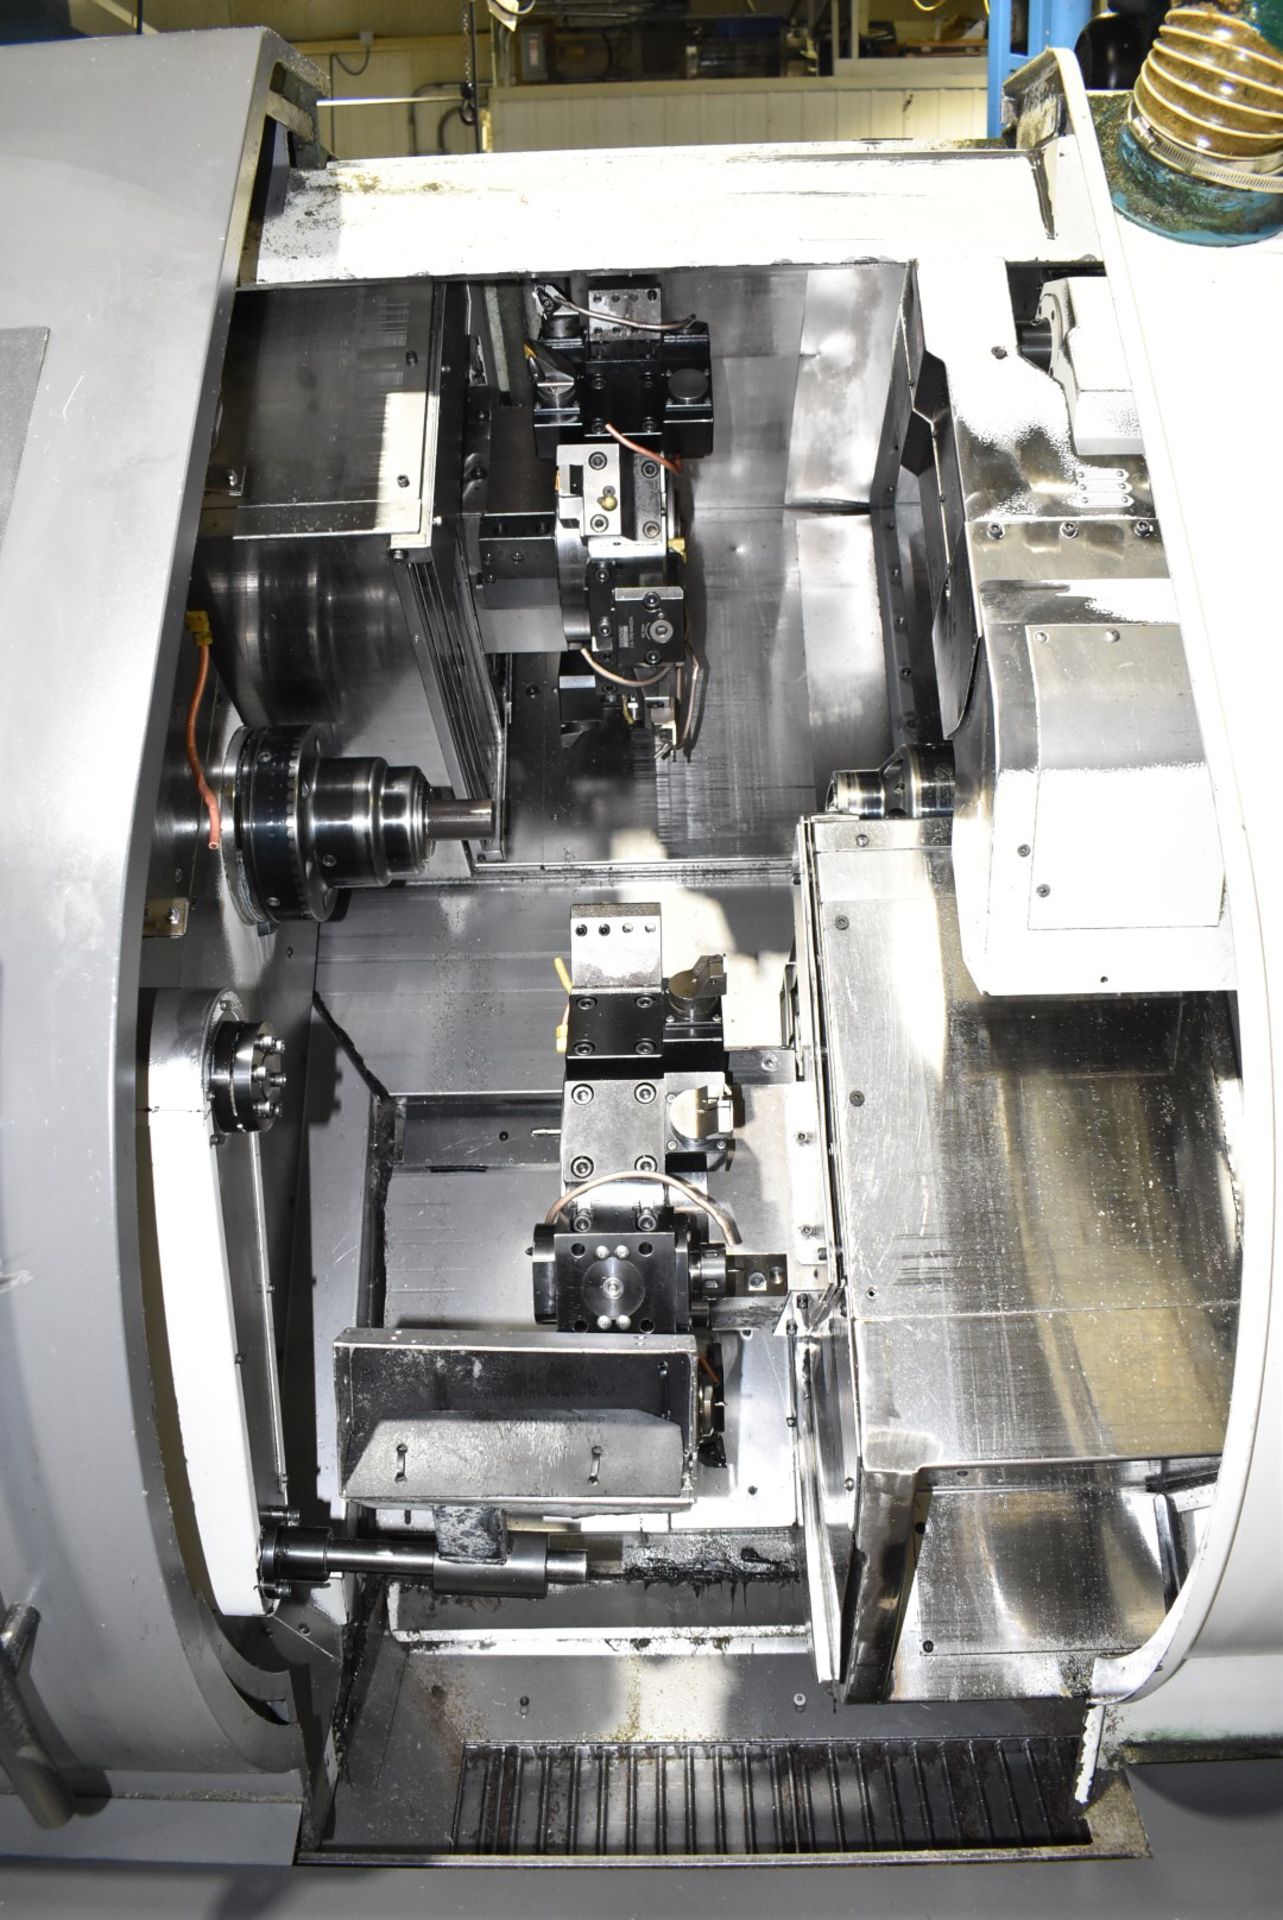 NAKAMURA-TOME (2006) WT-150 MMYS MULTI-AXIS OPPOSED SPINDLE AND TWIN TURRET CNC MULTI-TASKING CENTER - Image 2 of 15